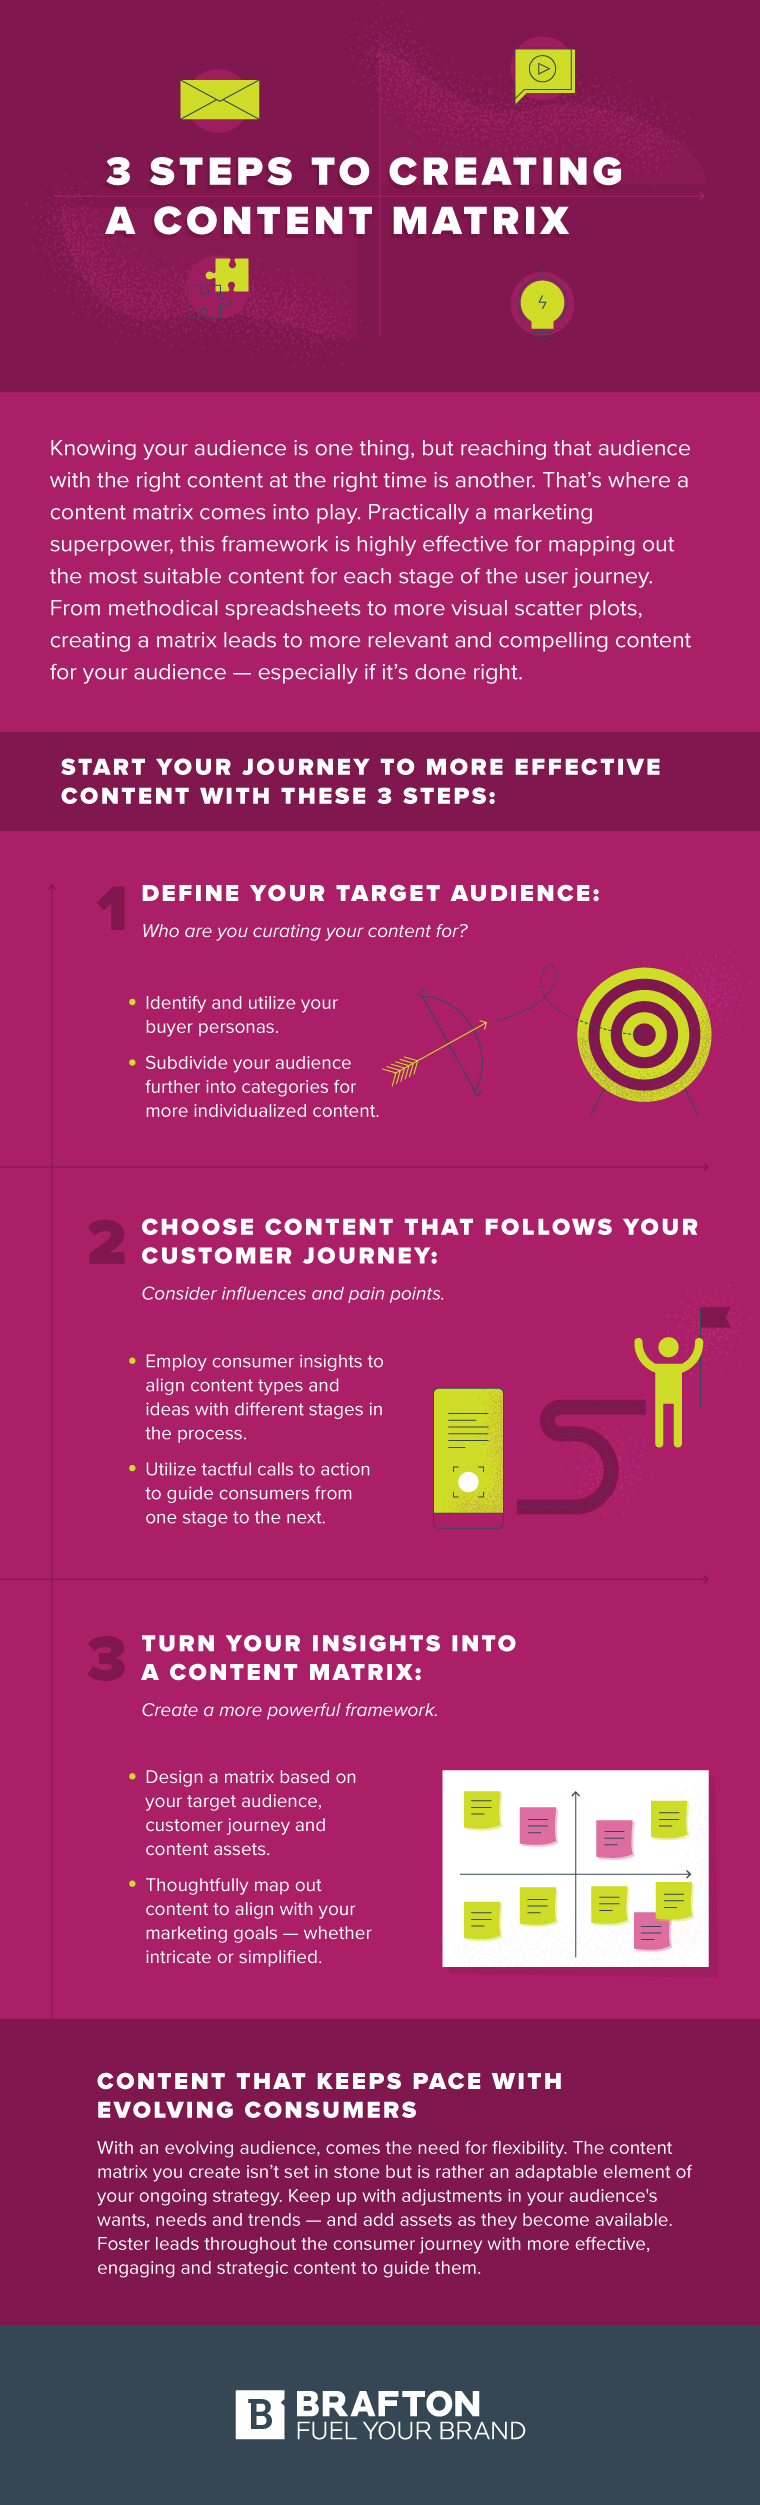 Infographic- 3 Steps to Creating a Content Matrix